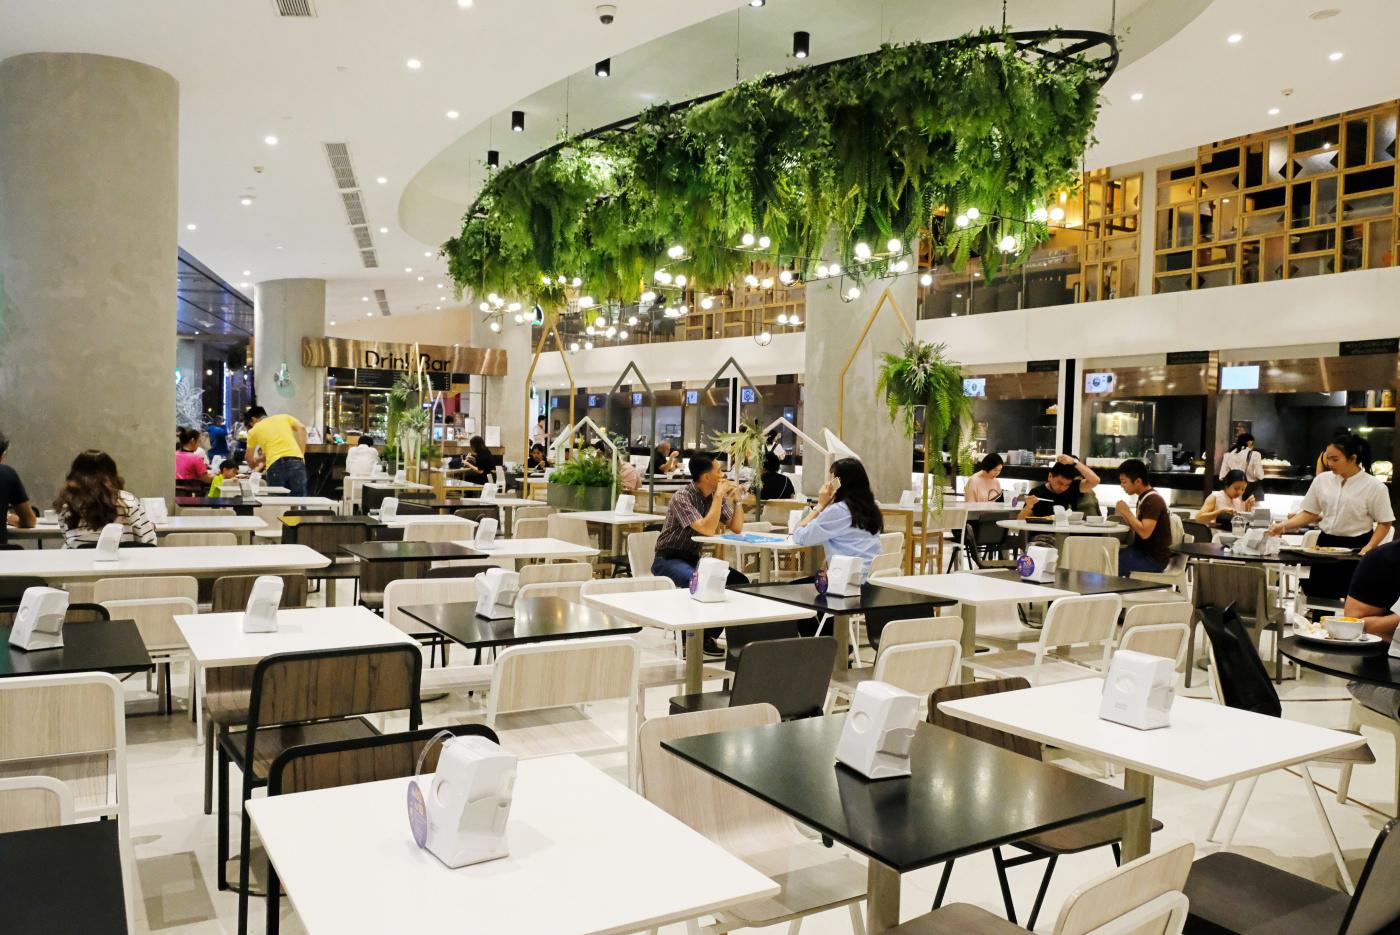 Optimizing shopping mall design, planning and branding strategies, planning food court design